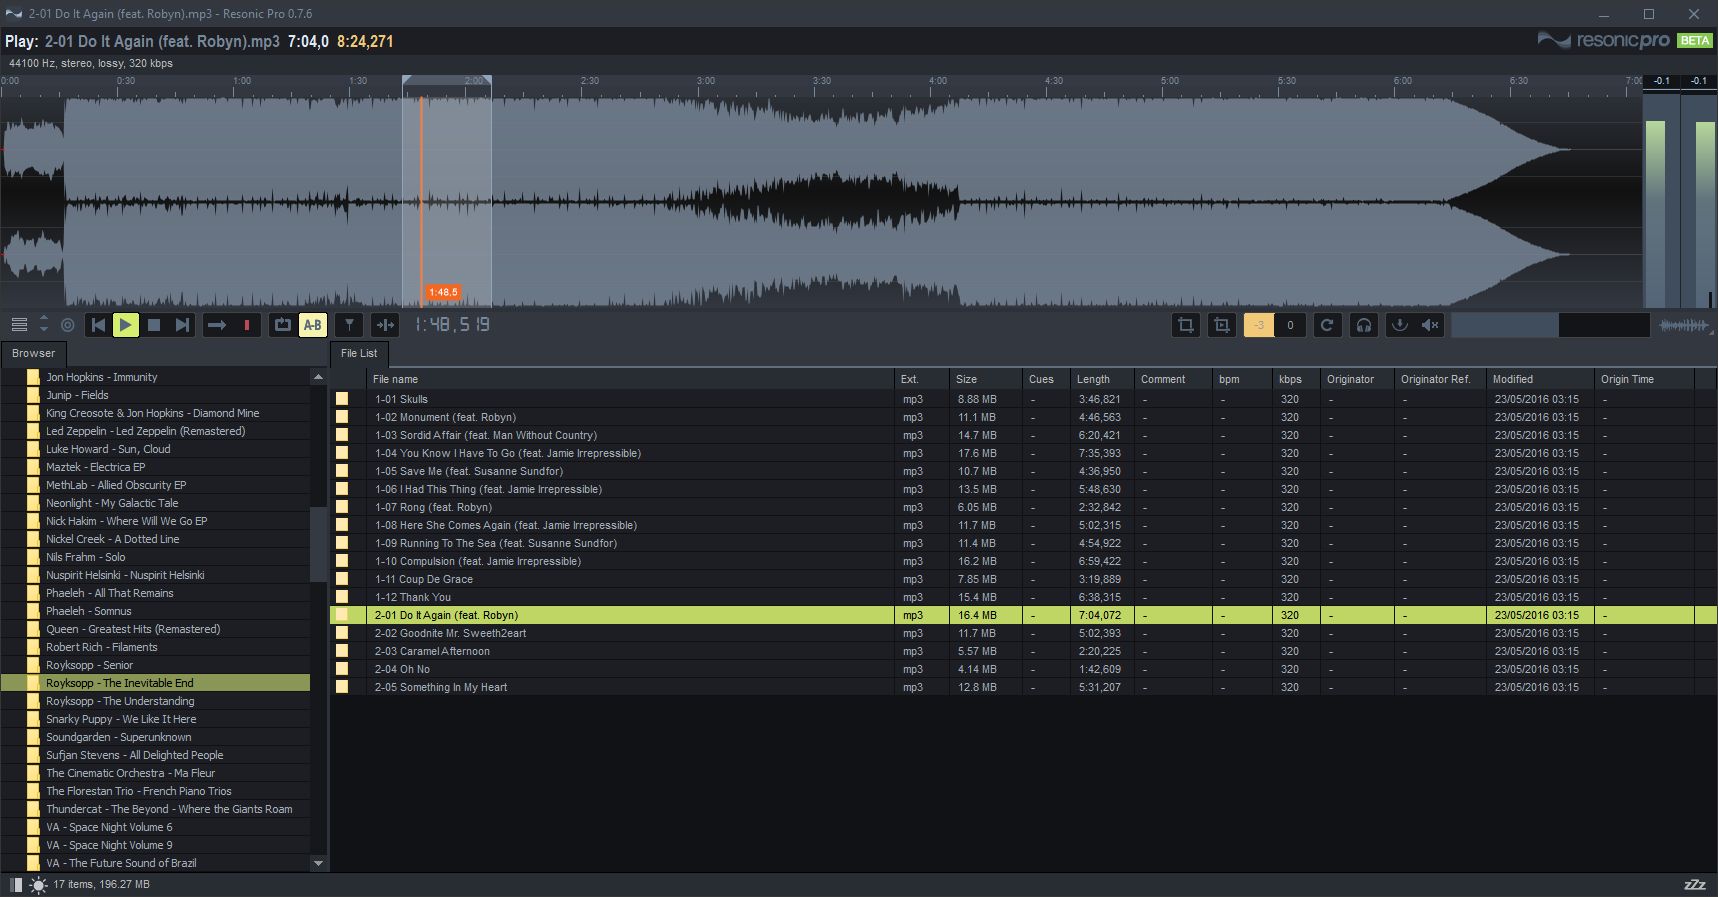 ADSR Sample Manager by ADSR - Find the perfect sound in an instant! for  Mac/Windows - ADSR Sounds